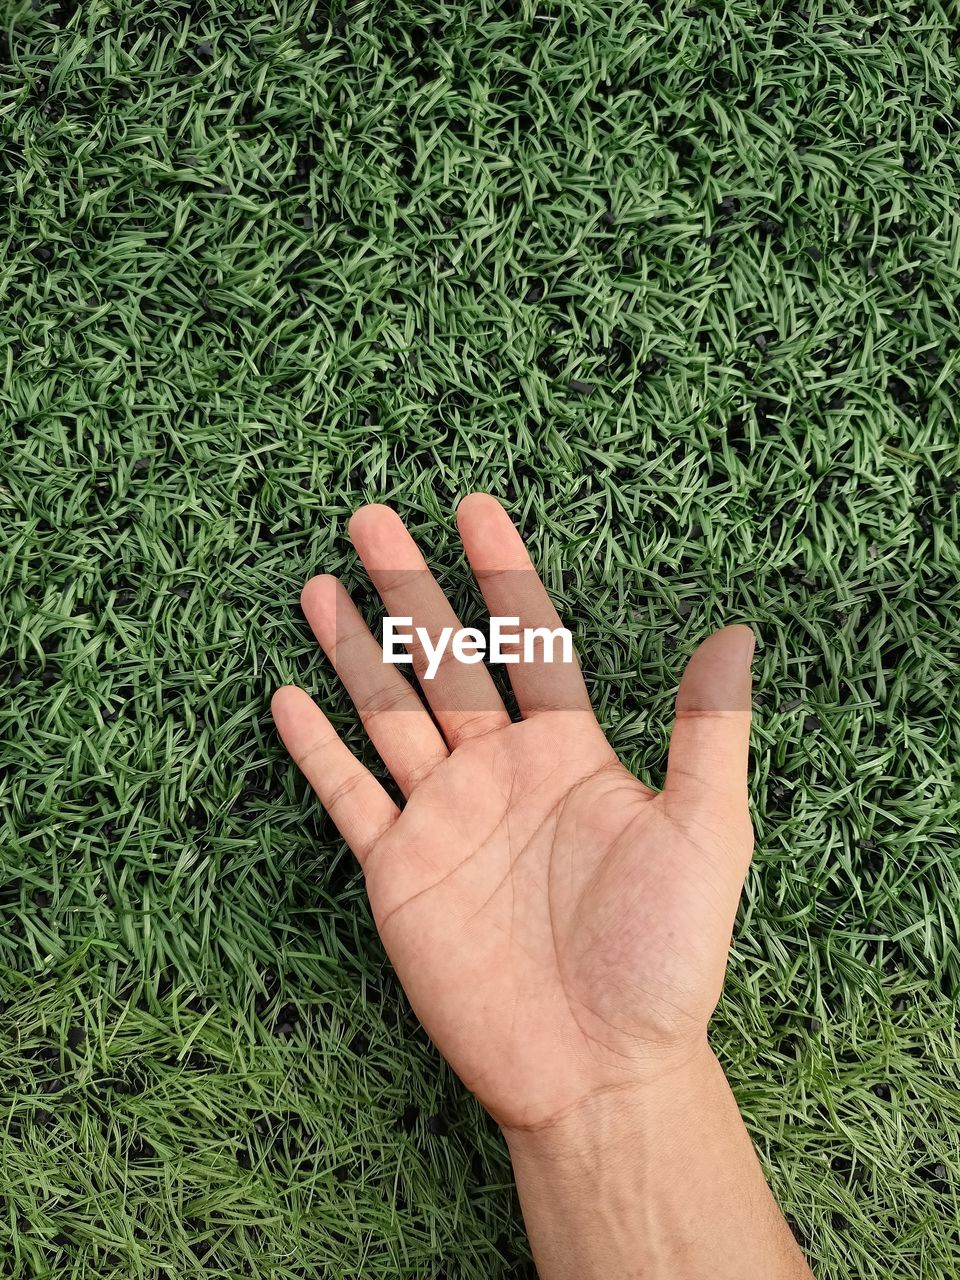 HIGH ANGLE VIEW OF HAND ON FIELD